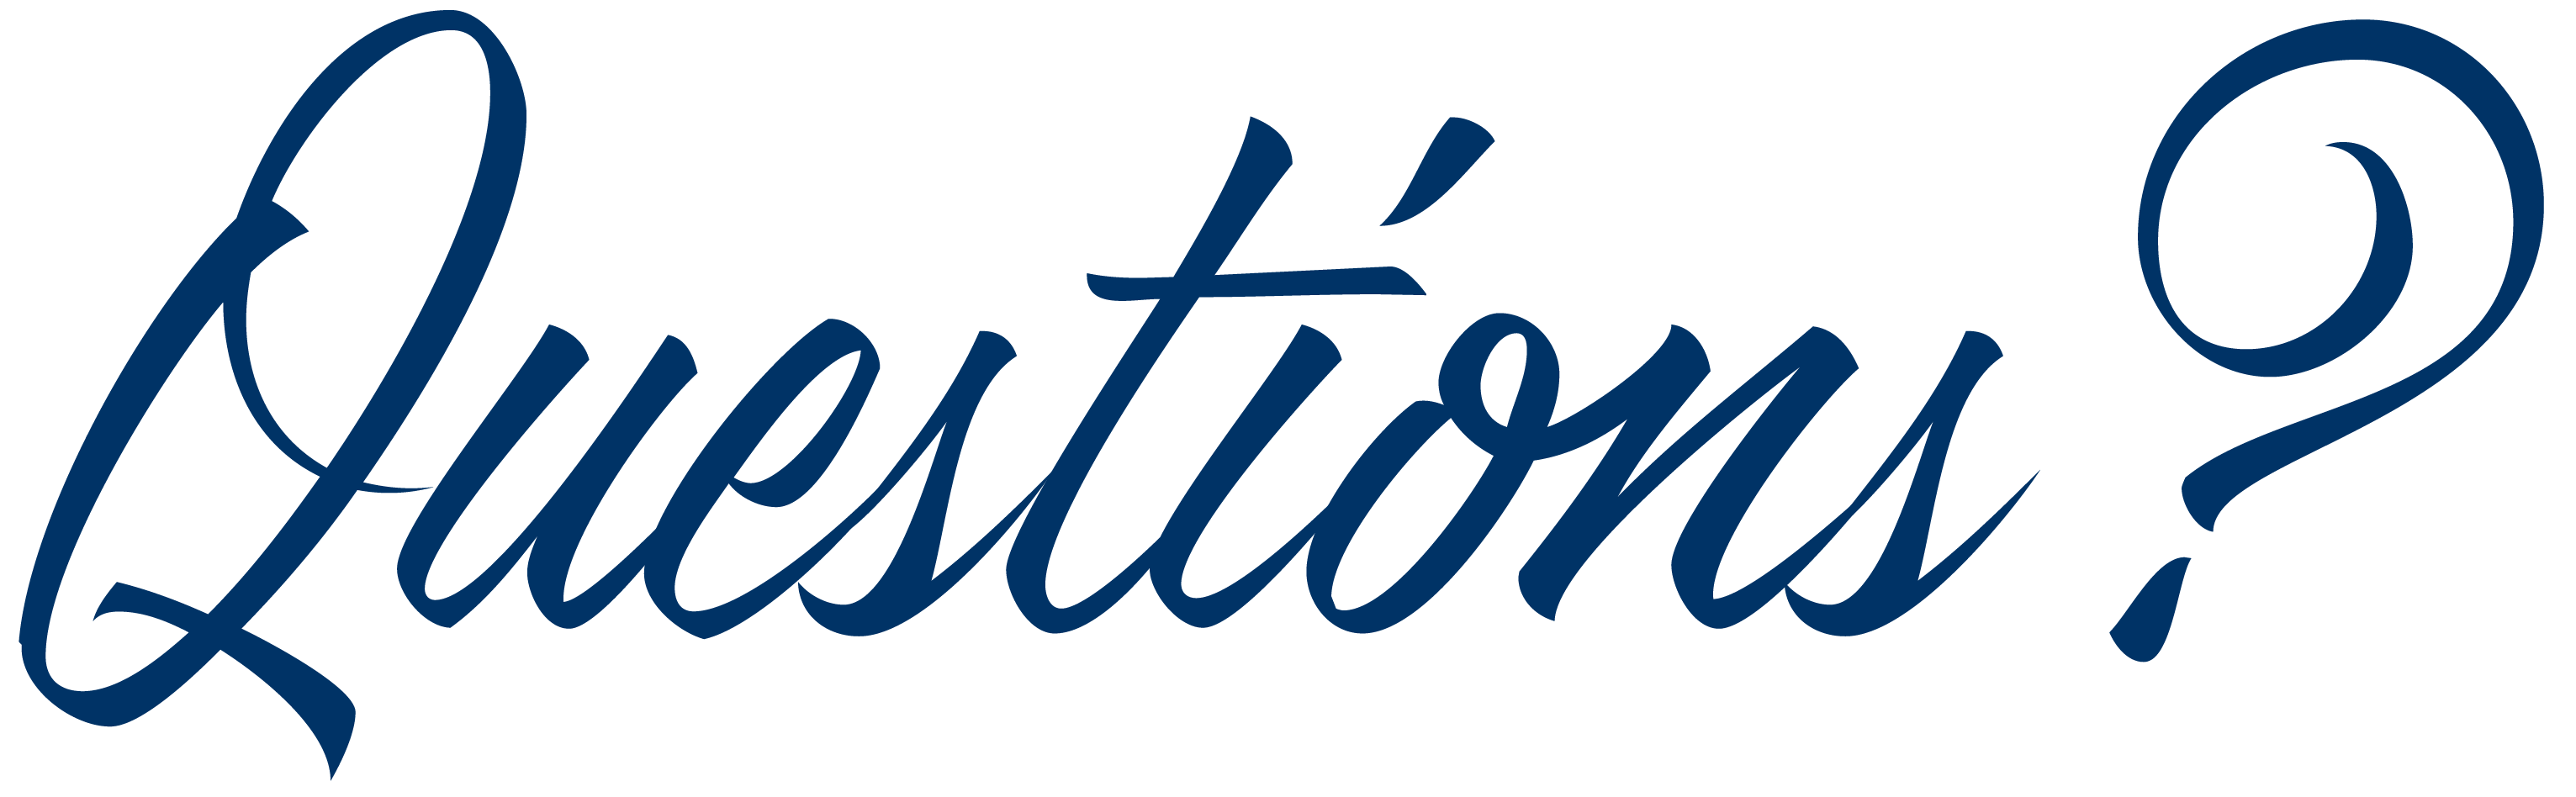 Questions in blue cursive font on white background